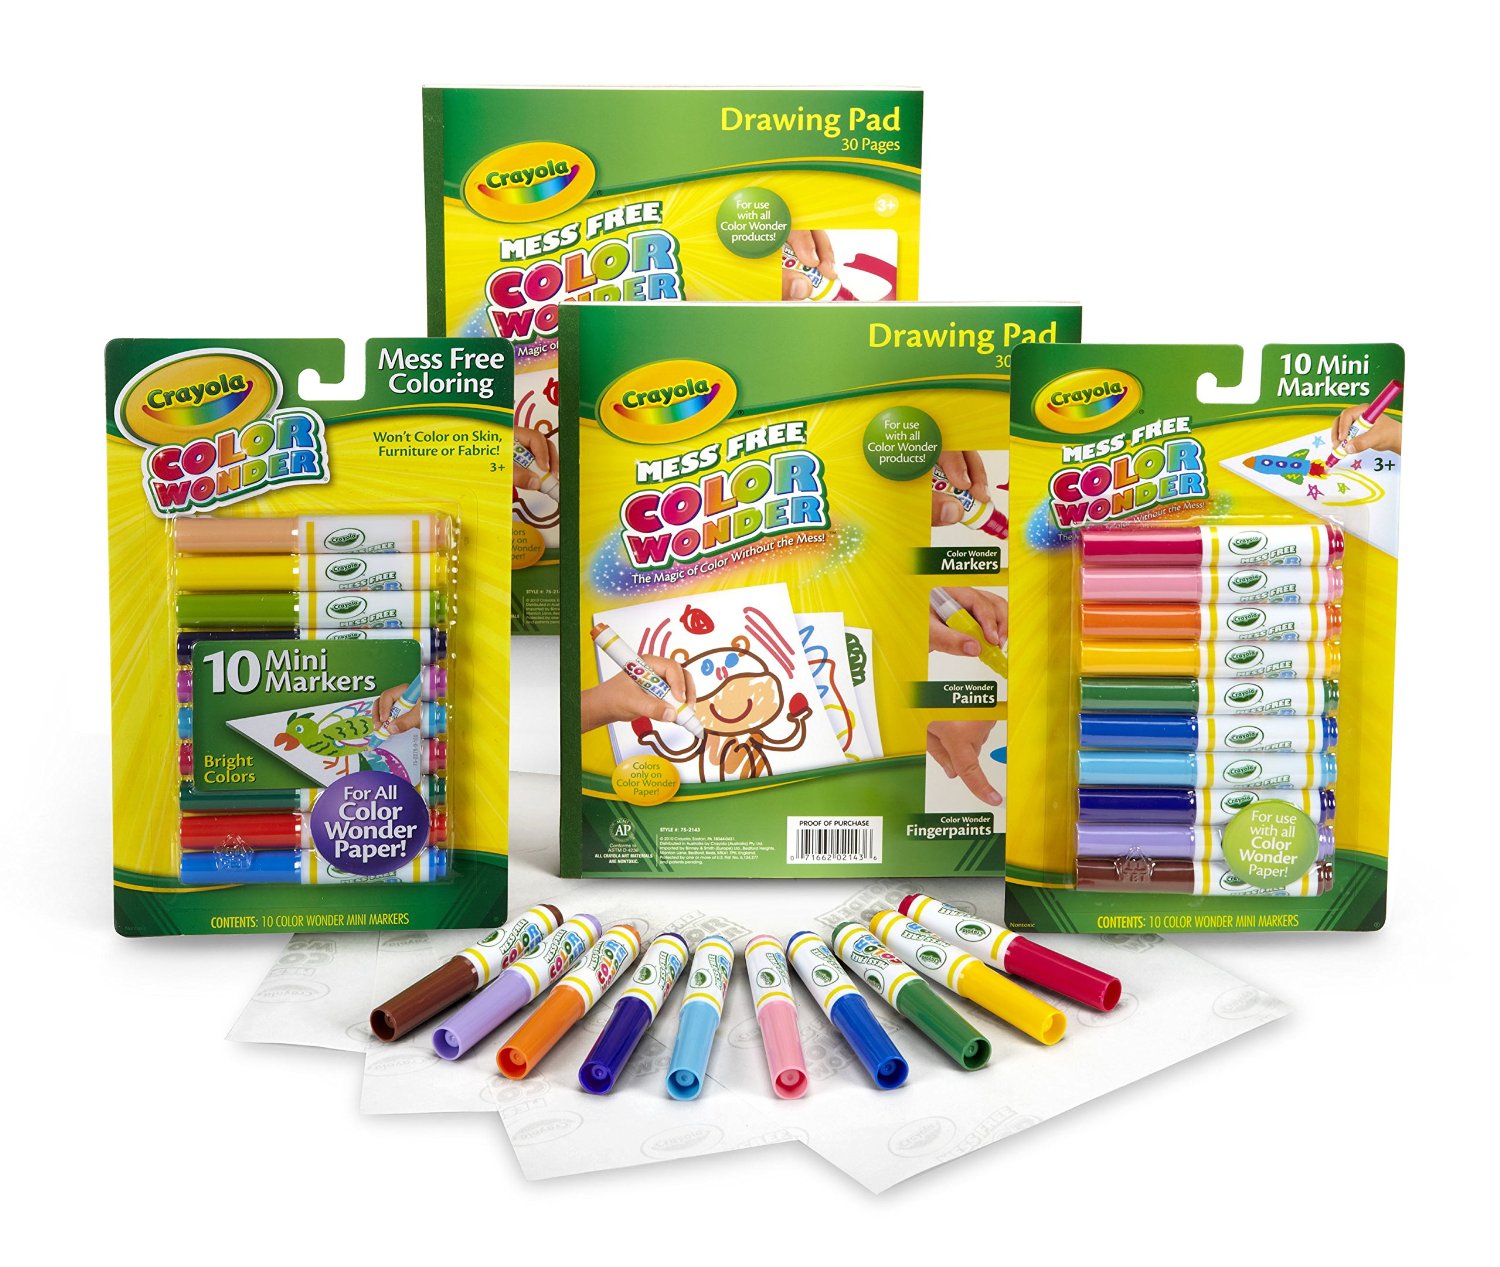 Crayola Products up to 40% OFF on Amazon Today Only! See My Favorite Deals!